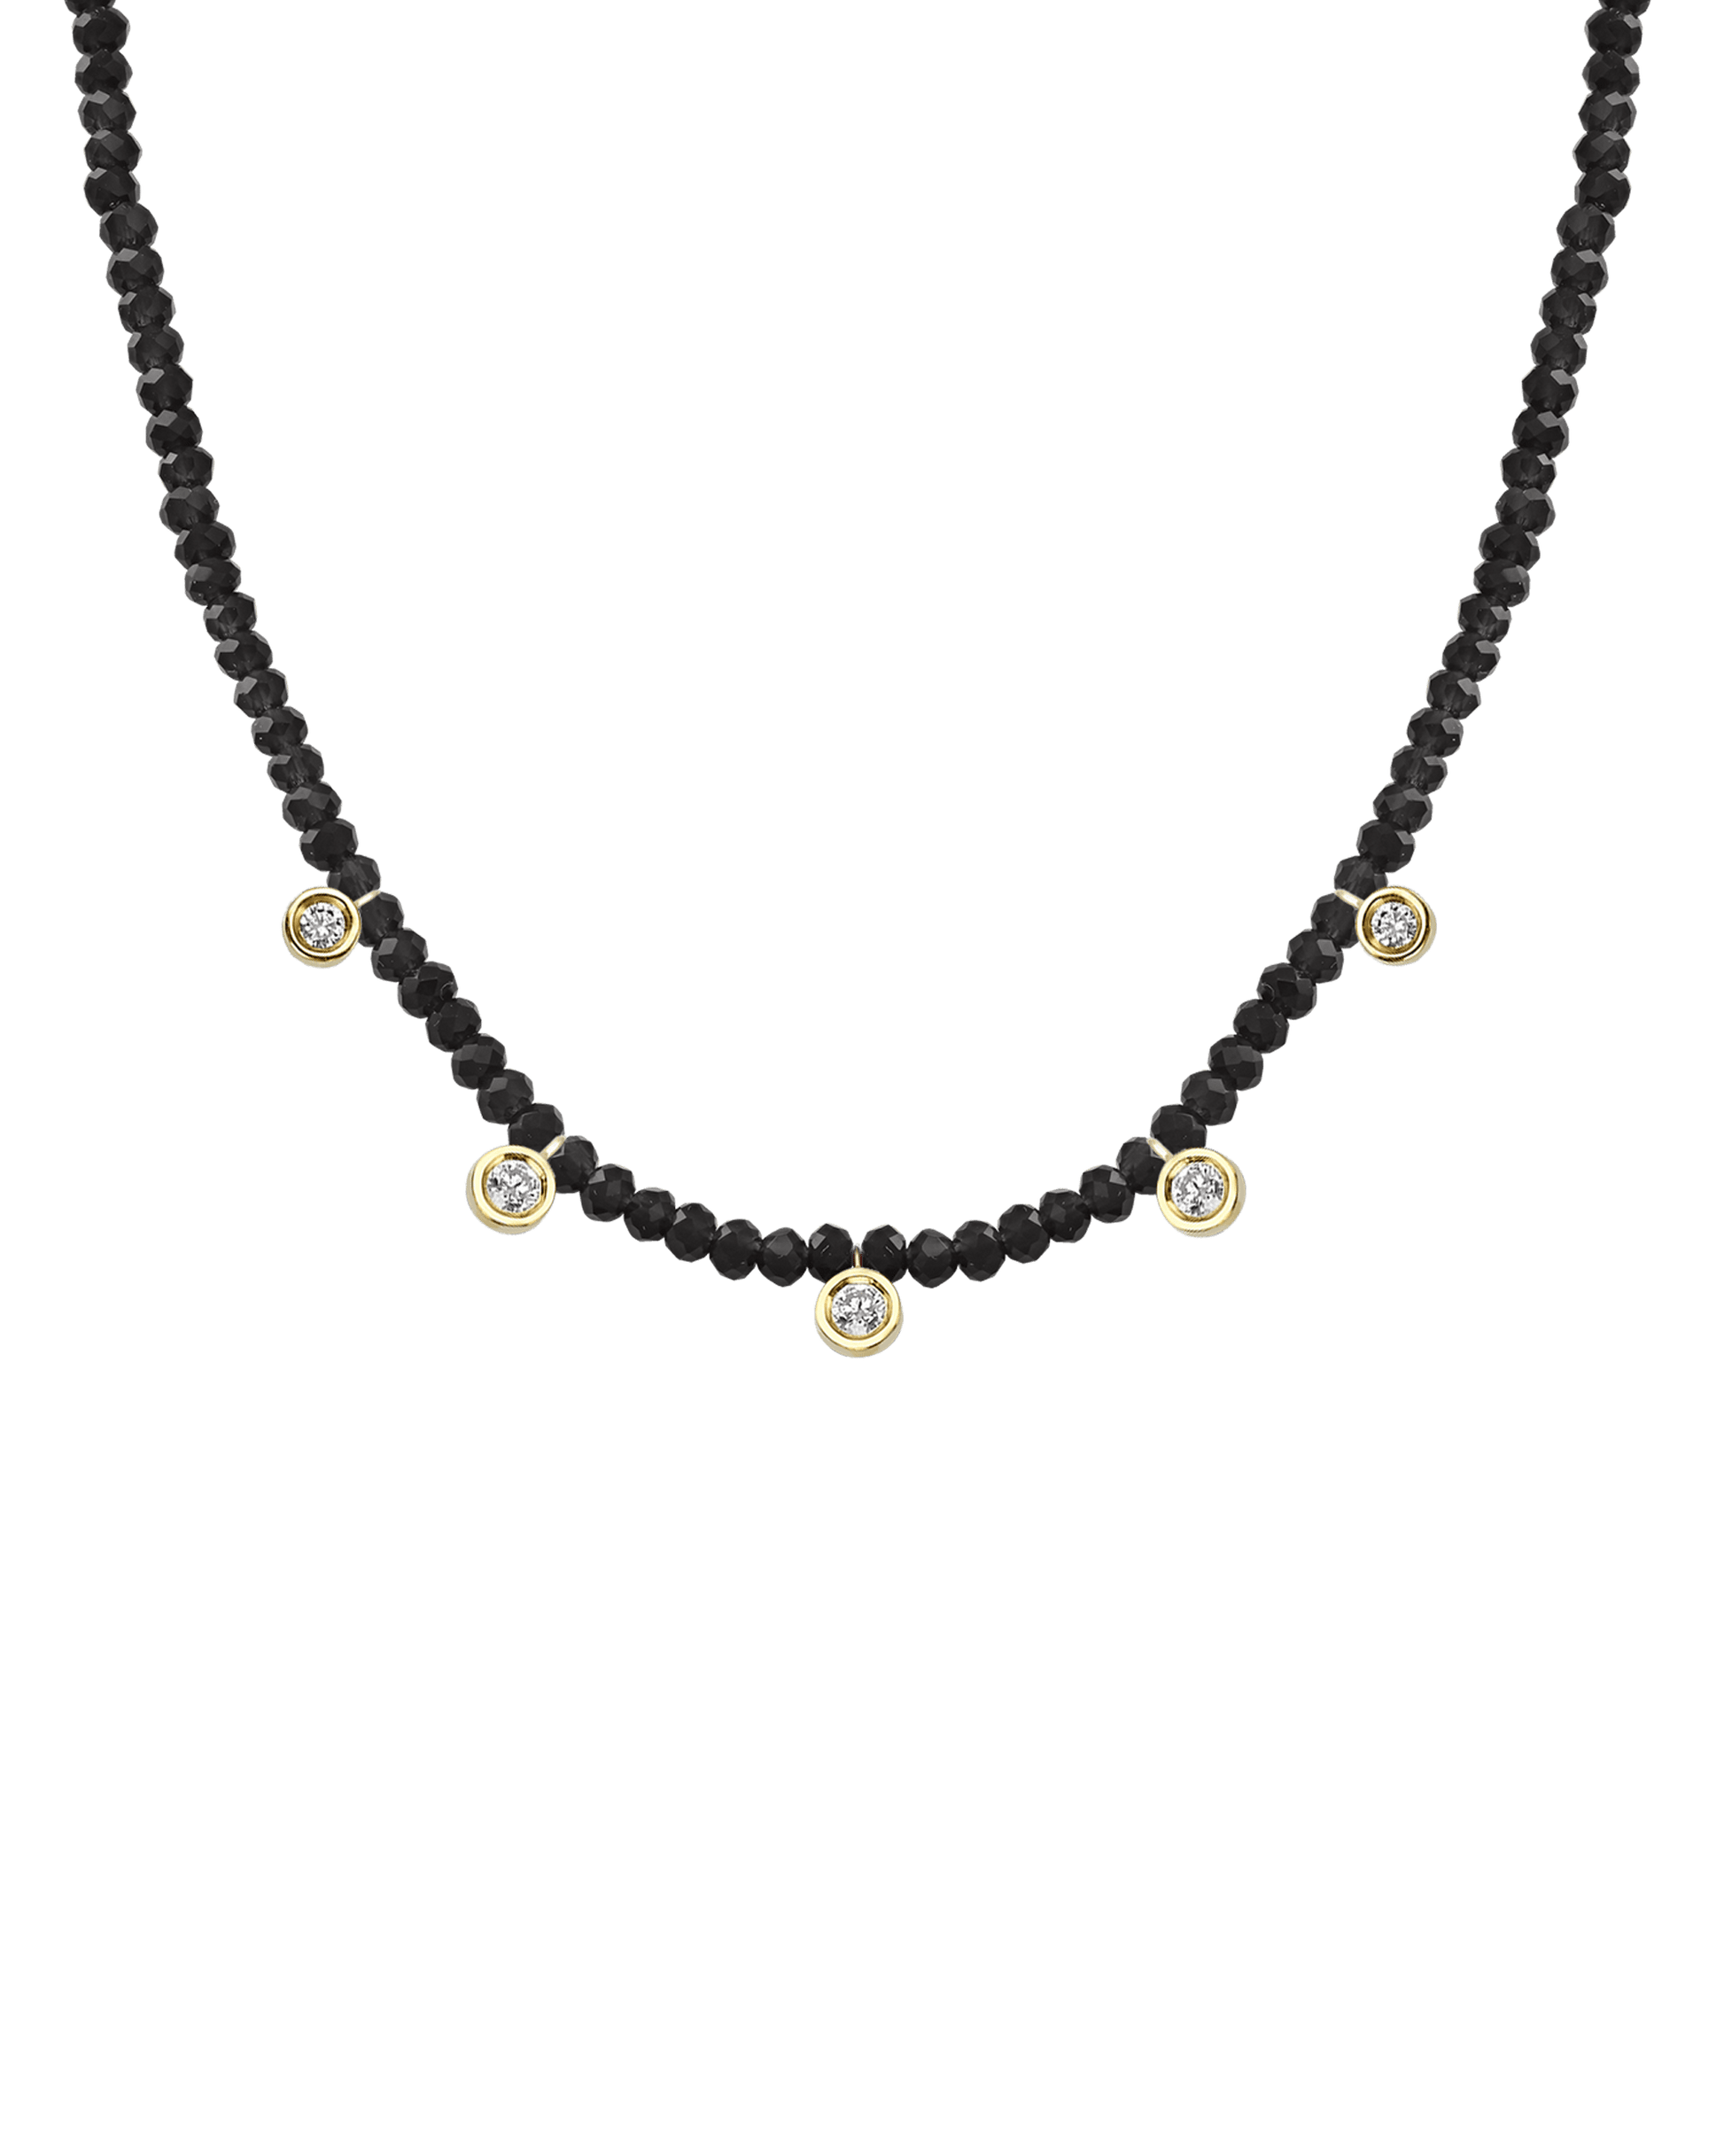 Apatite Gemstone & Five diamonds Necklace - 14K White Gold Necklaces magal-dev Glass Beads Black Spinnel 14" - Collar 